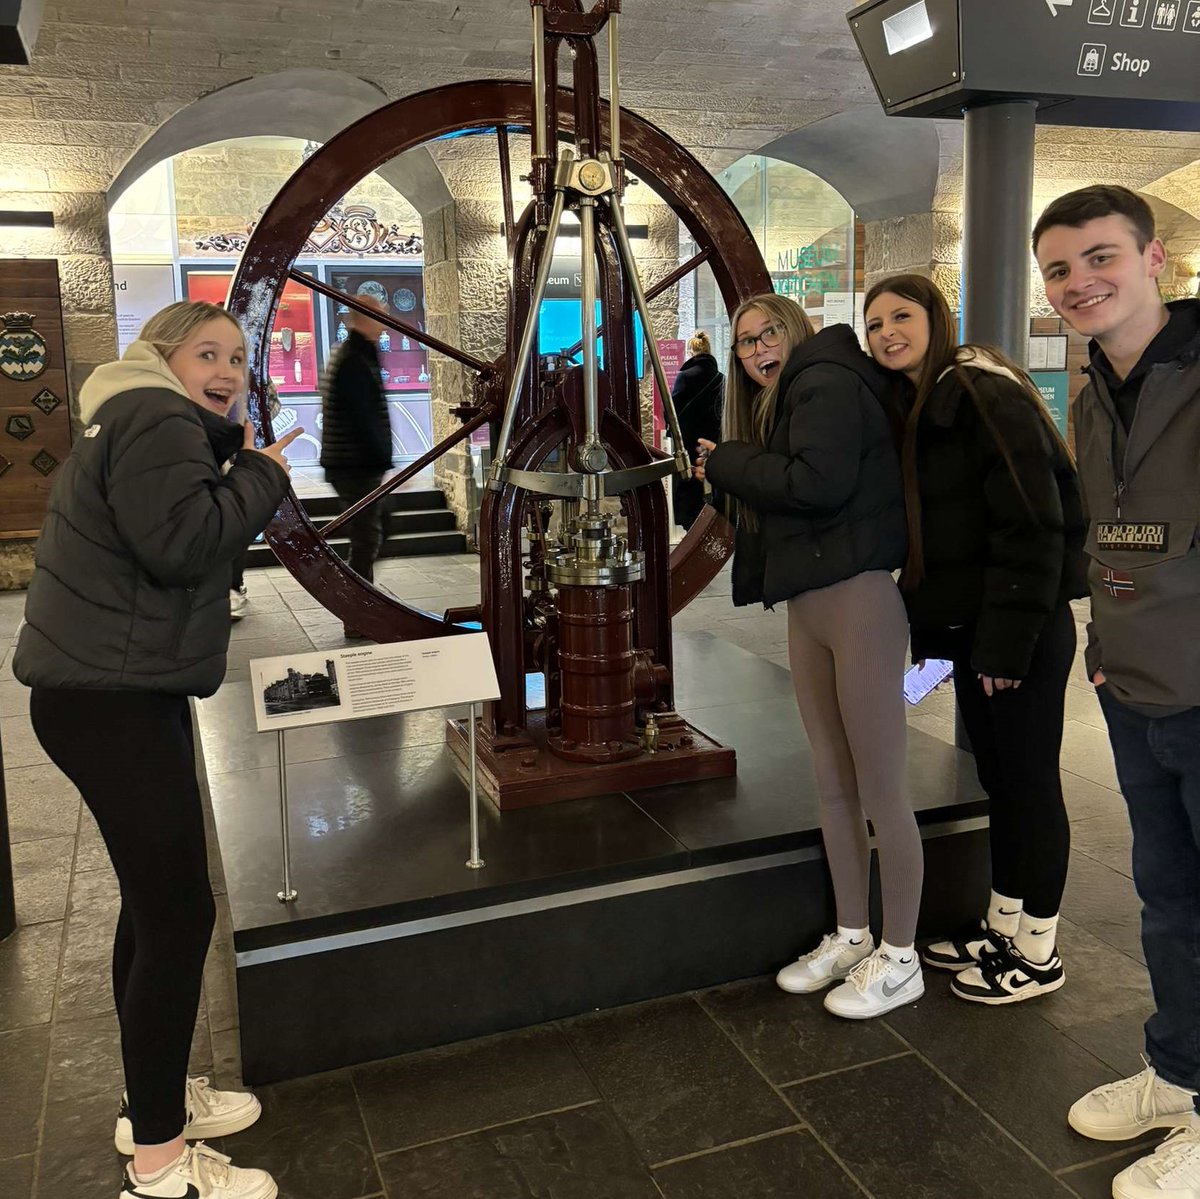 Our Travel & Tourism students explored Edinburgh's rich culture ! 🏰 They had a great time taking in the sights, and it is one of many trips our students take during their studies!